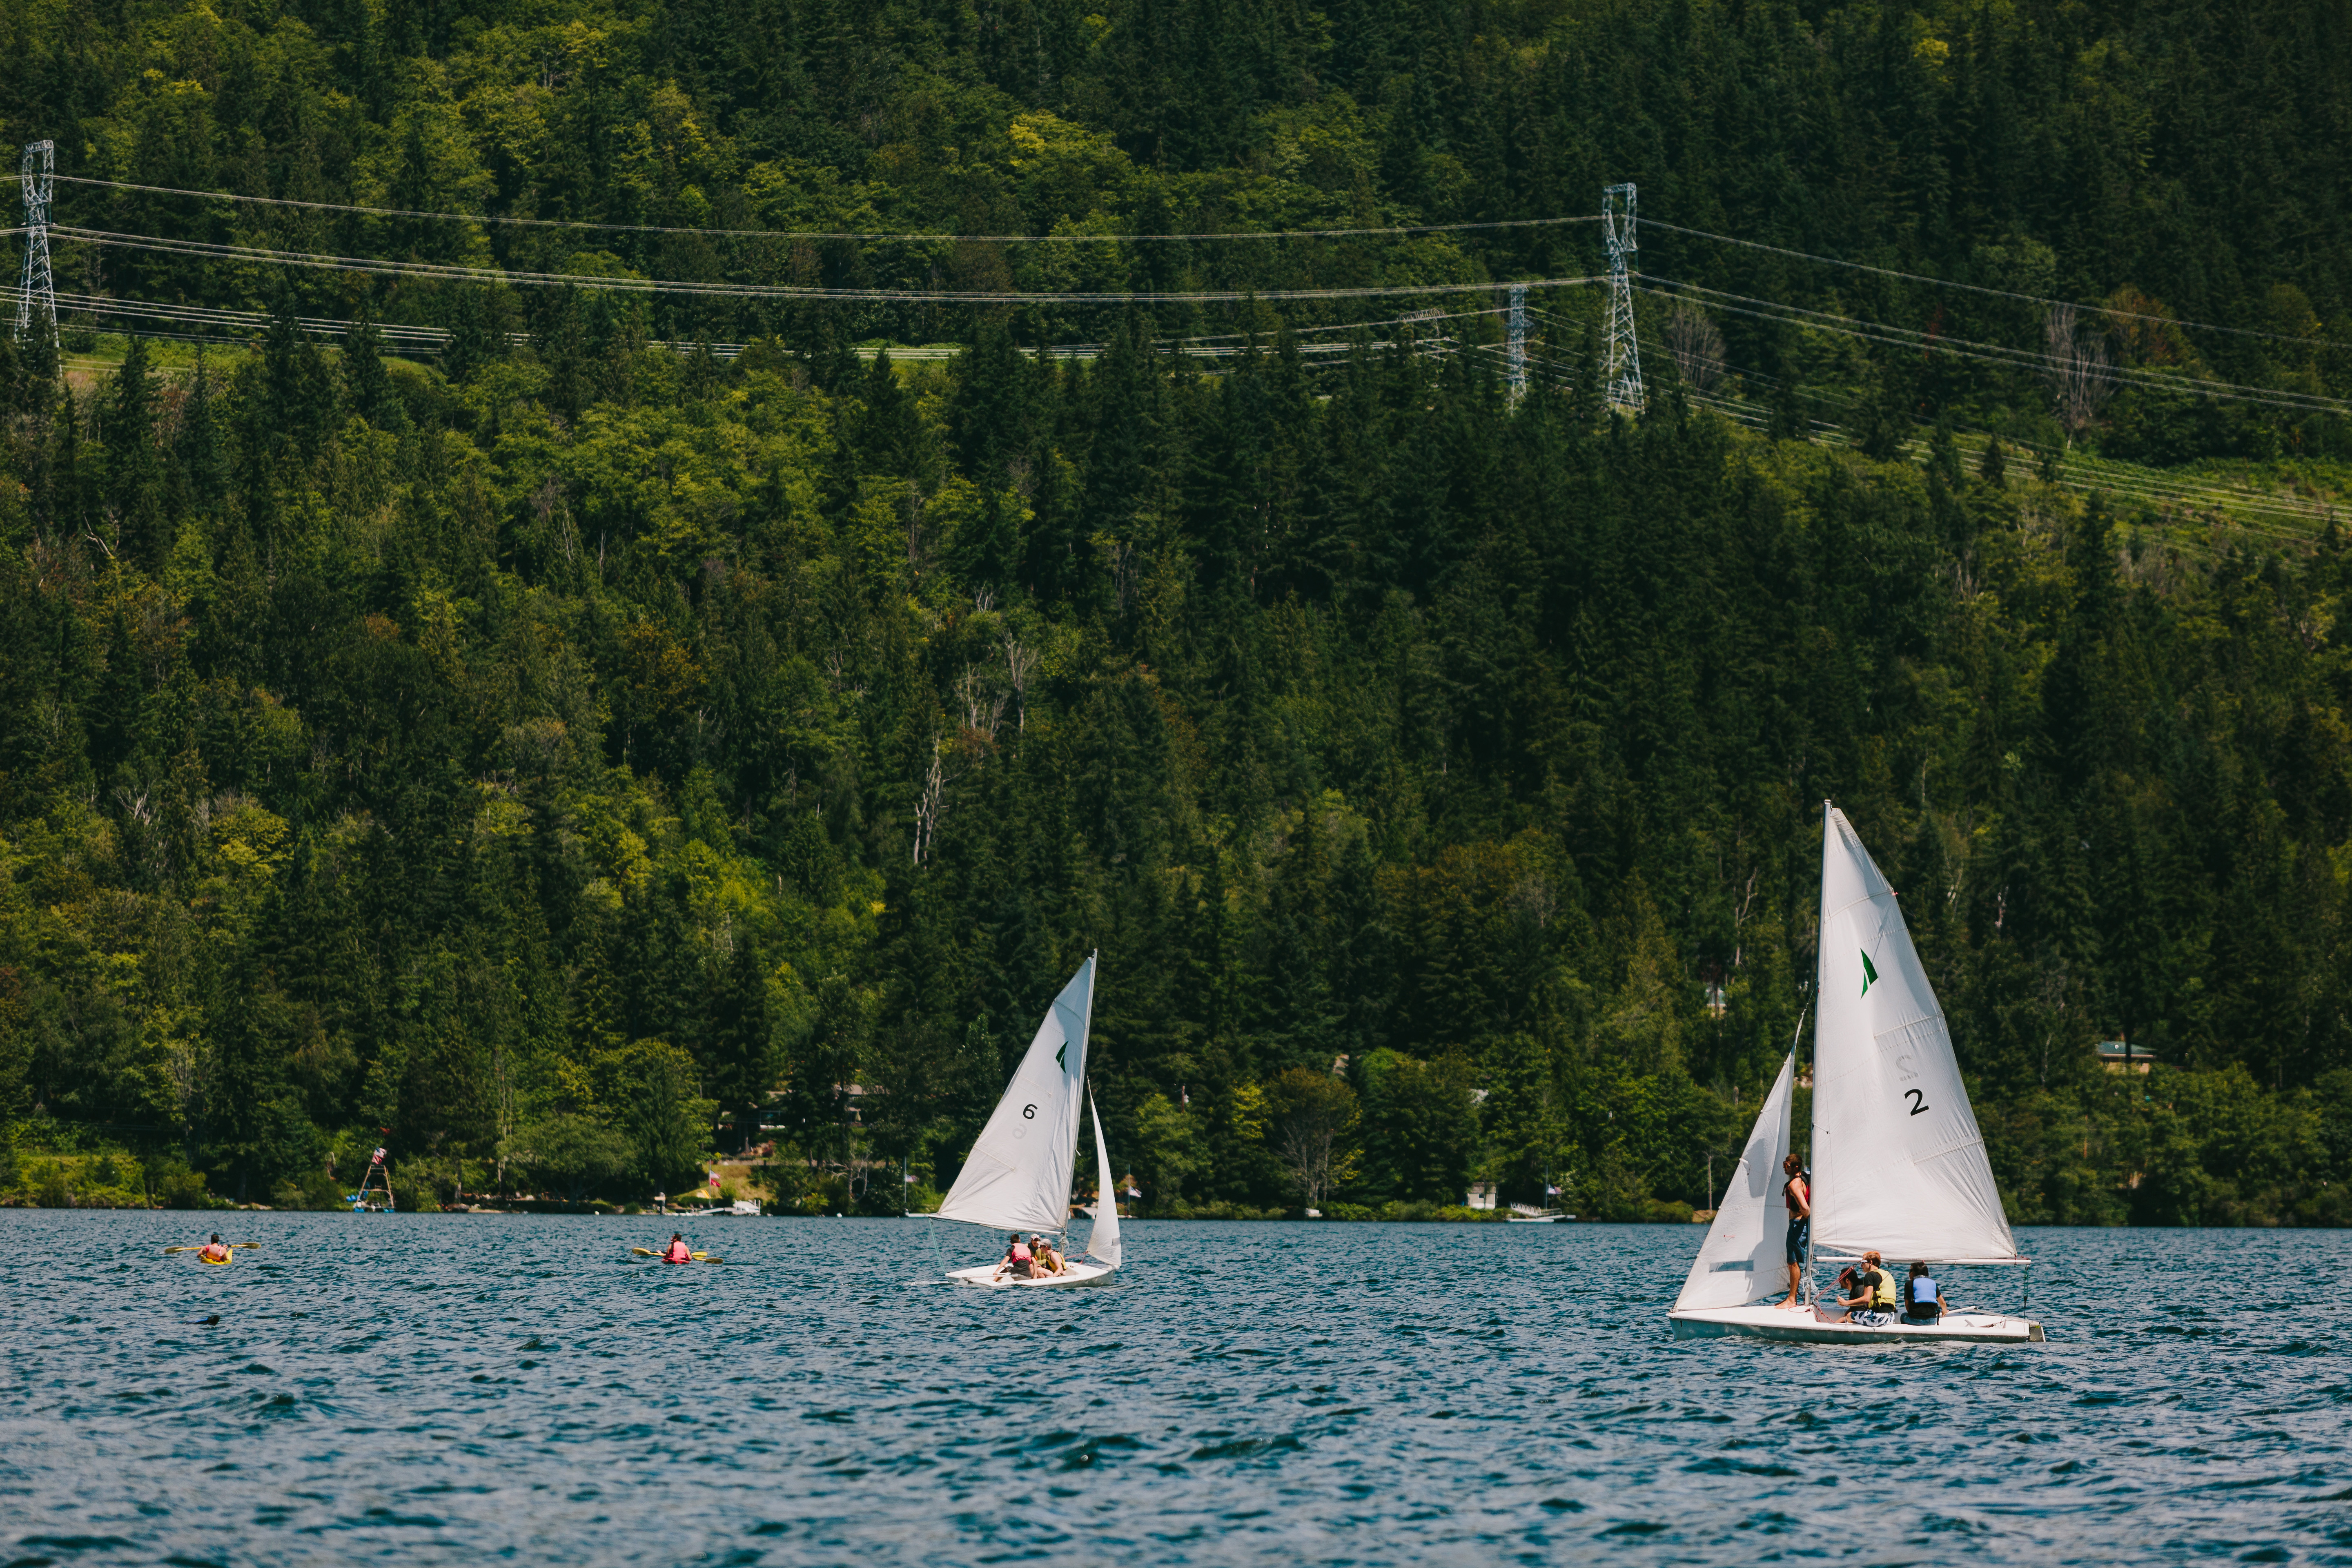 Two sailboats with white sails are in the middle of Lake Whatcom. There is a big hill with trees and greenery in the distance behind the boats. There are some very small waves on the water.